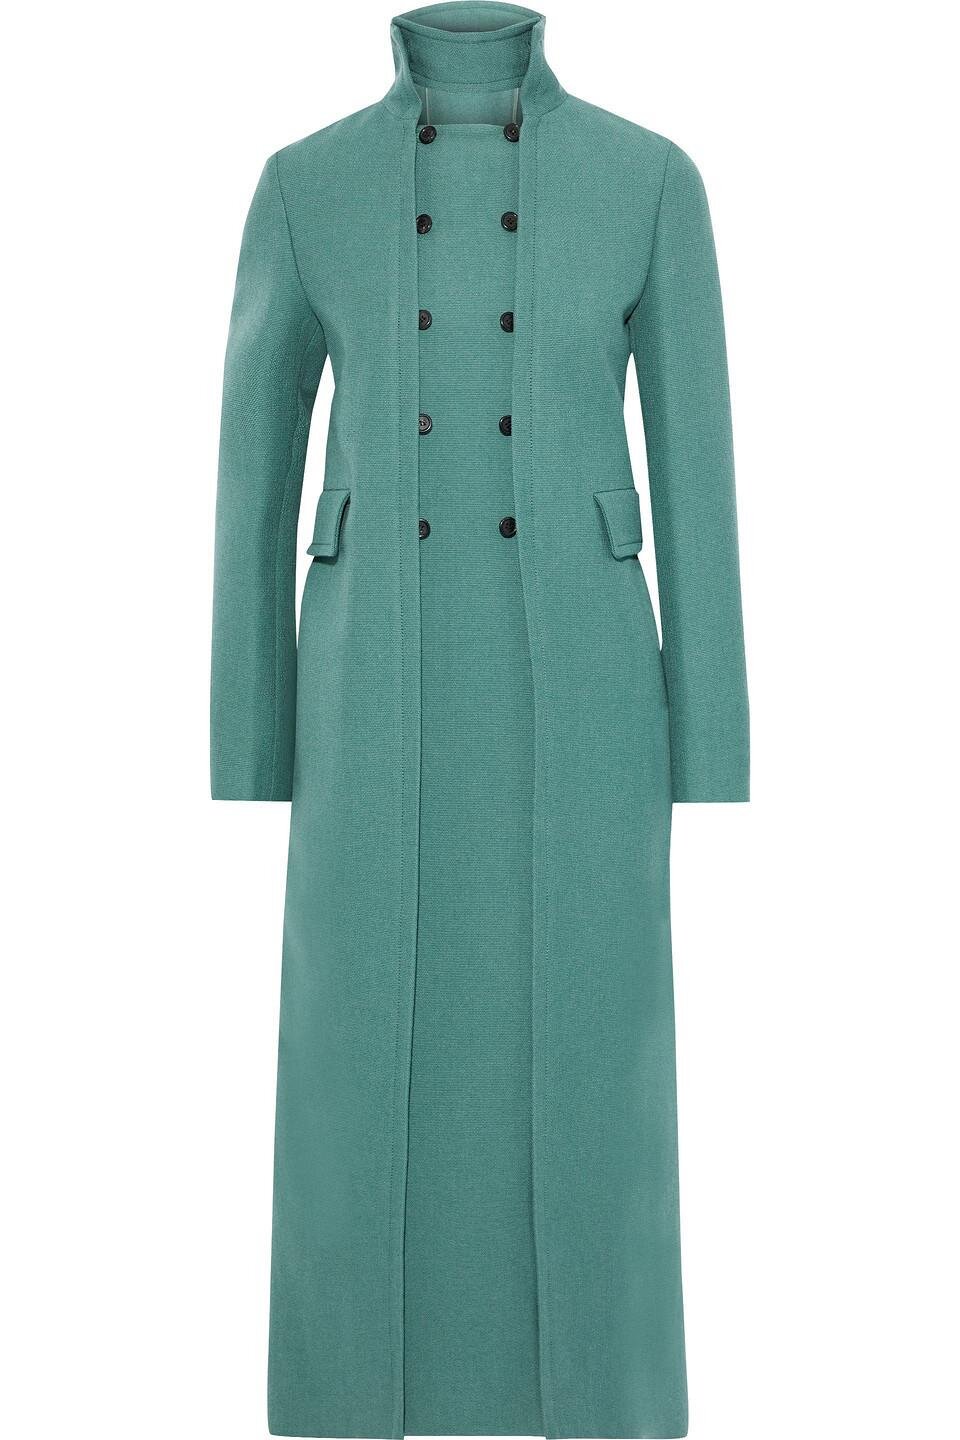 Valentino Convertible Double-breasted Wool Coat in Jade.jpg